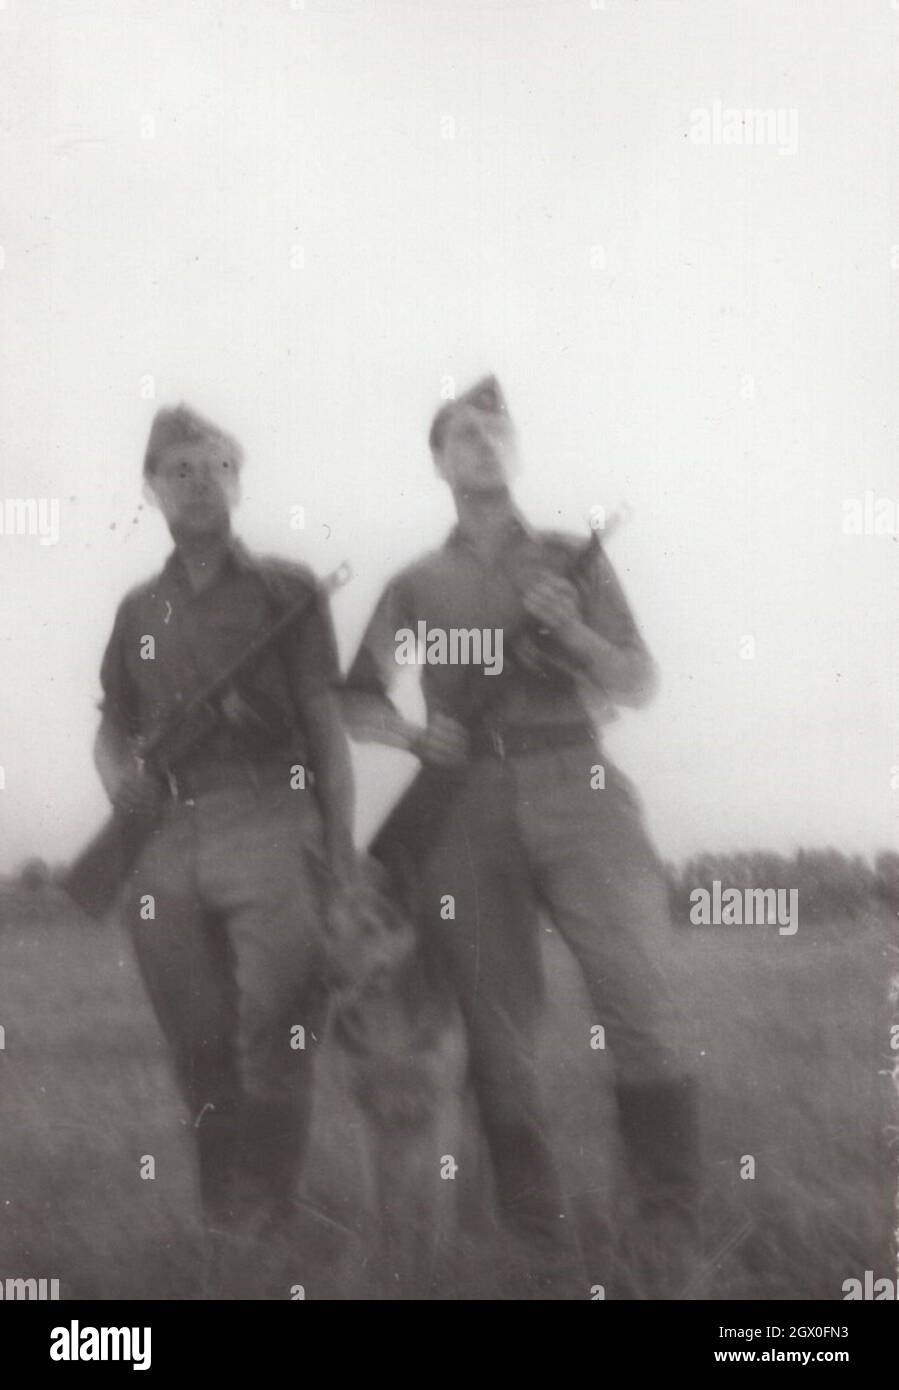 vintage / Retro army / military PPsh-41 series 1. Two soldiers are with a dog ( German Shepherd ) posing with them  Soviet submachine gun on the field  around at the 1950's. They are from Eastern Europe possibly Hungary. Source: original photograph papasha design by Georgy Shpagin. The PPSh-41 was in service from 1941-1960's Stock Photo